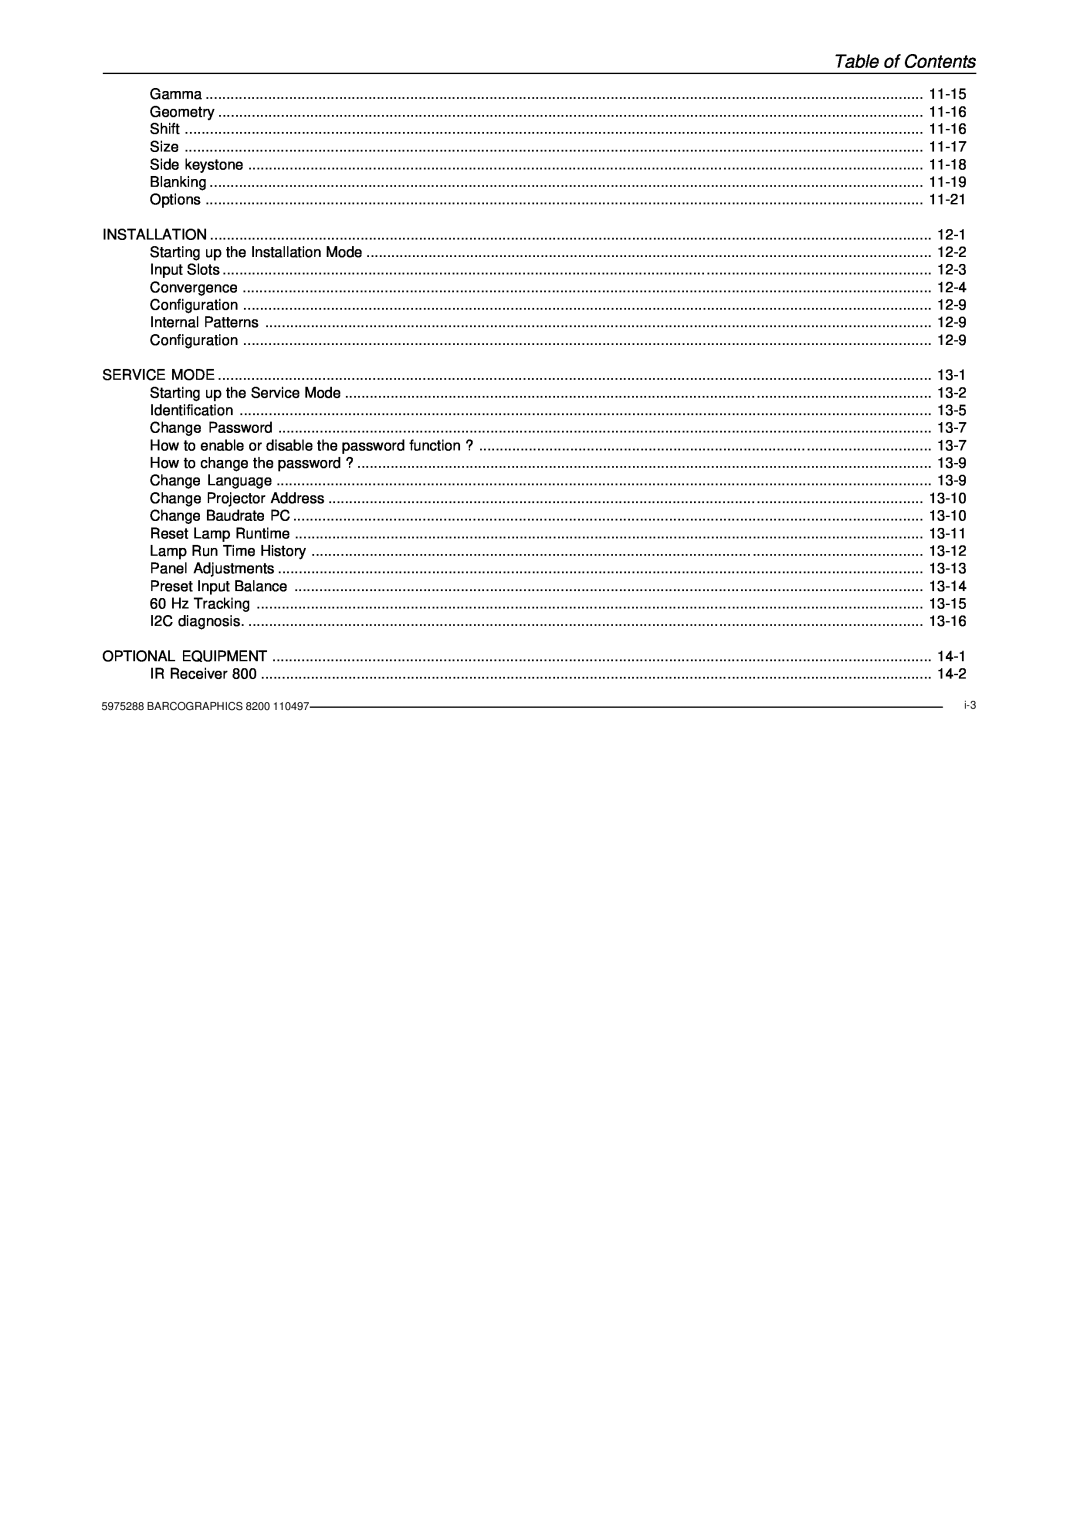 Barco R9001330 owner manual Table of Contents 